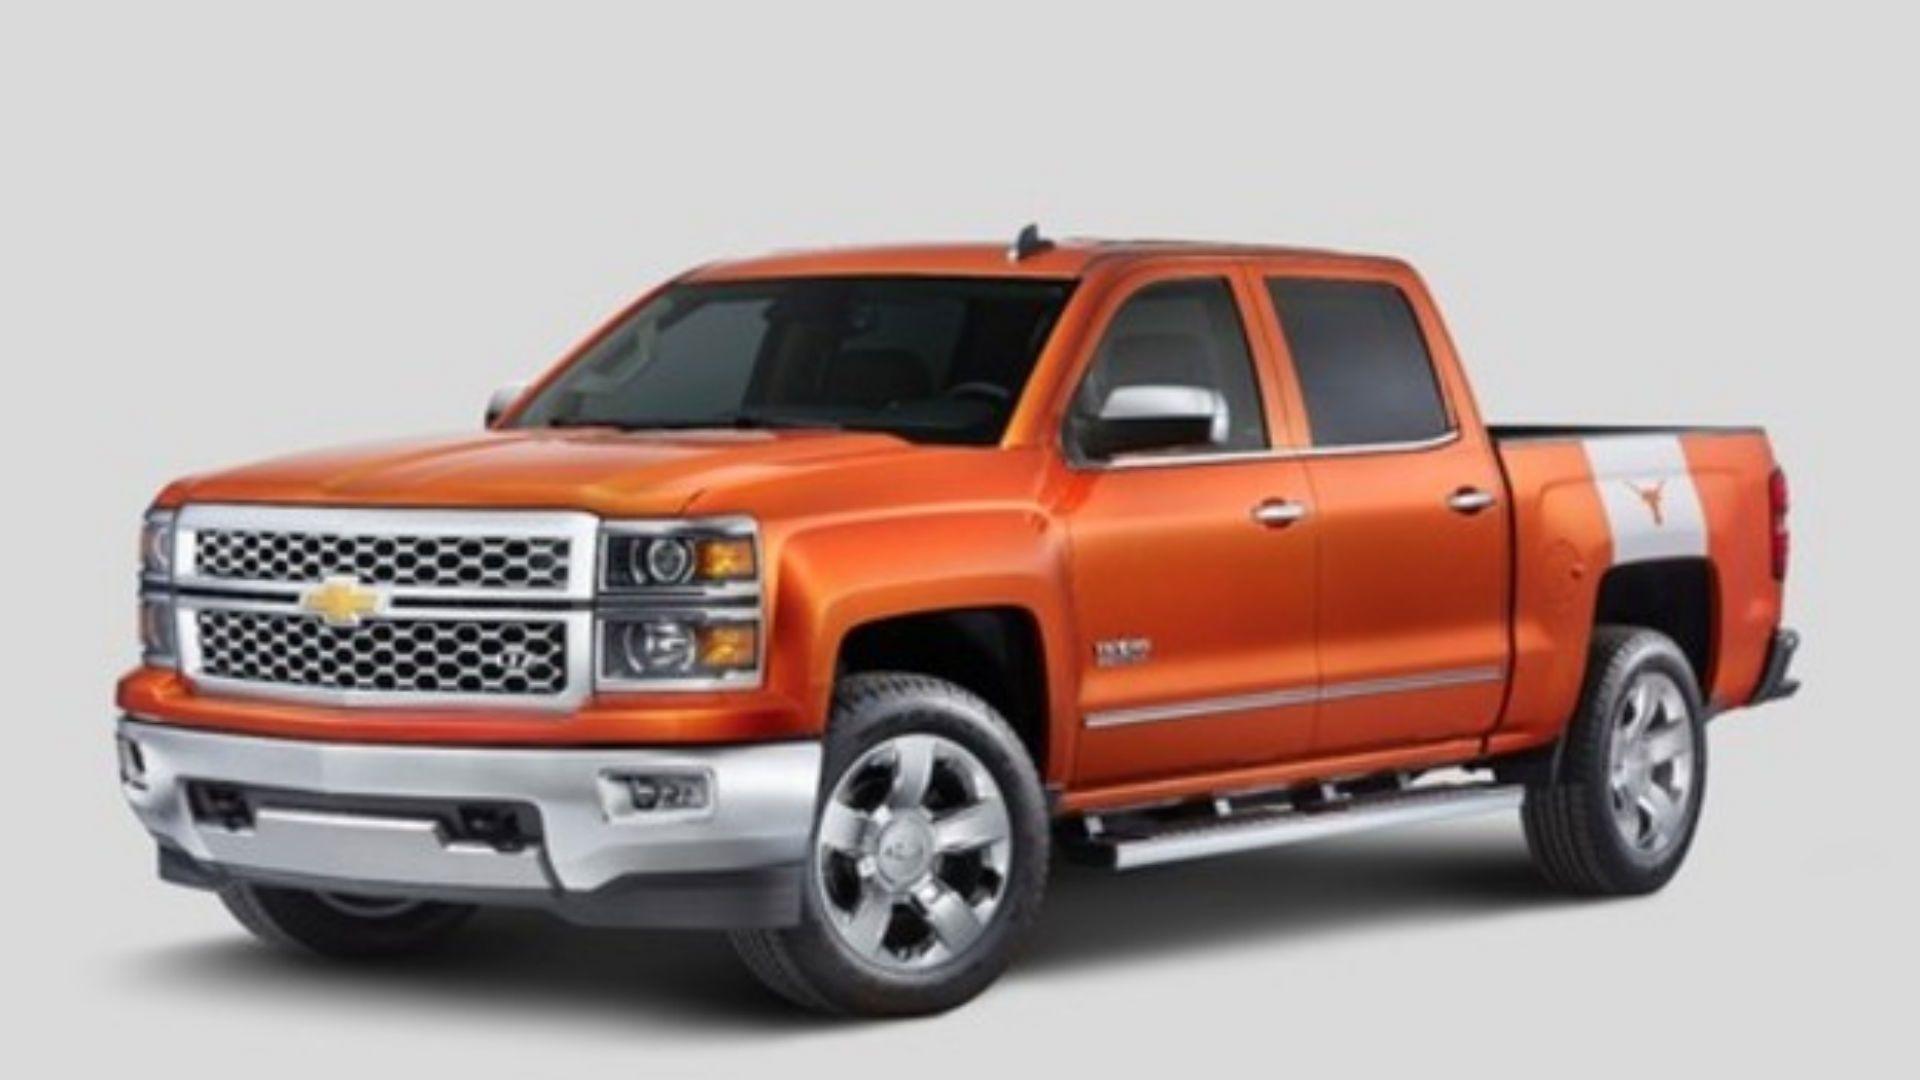 Chevy releases Texas Longhorn truck